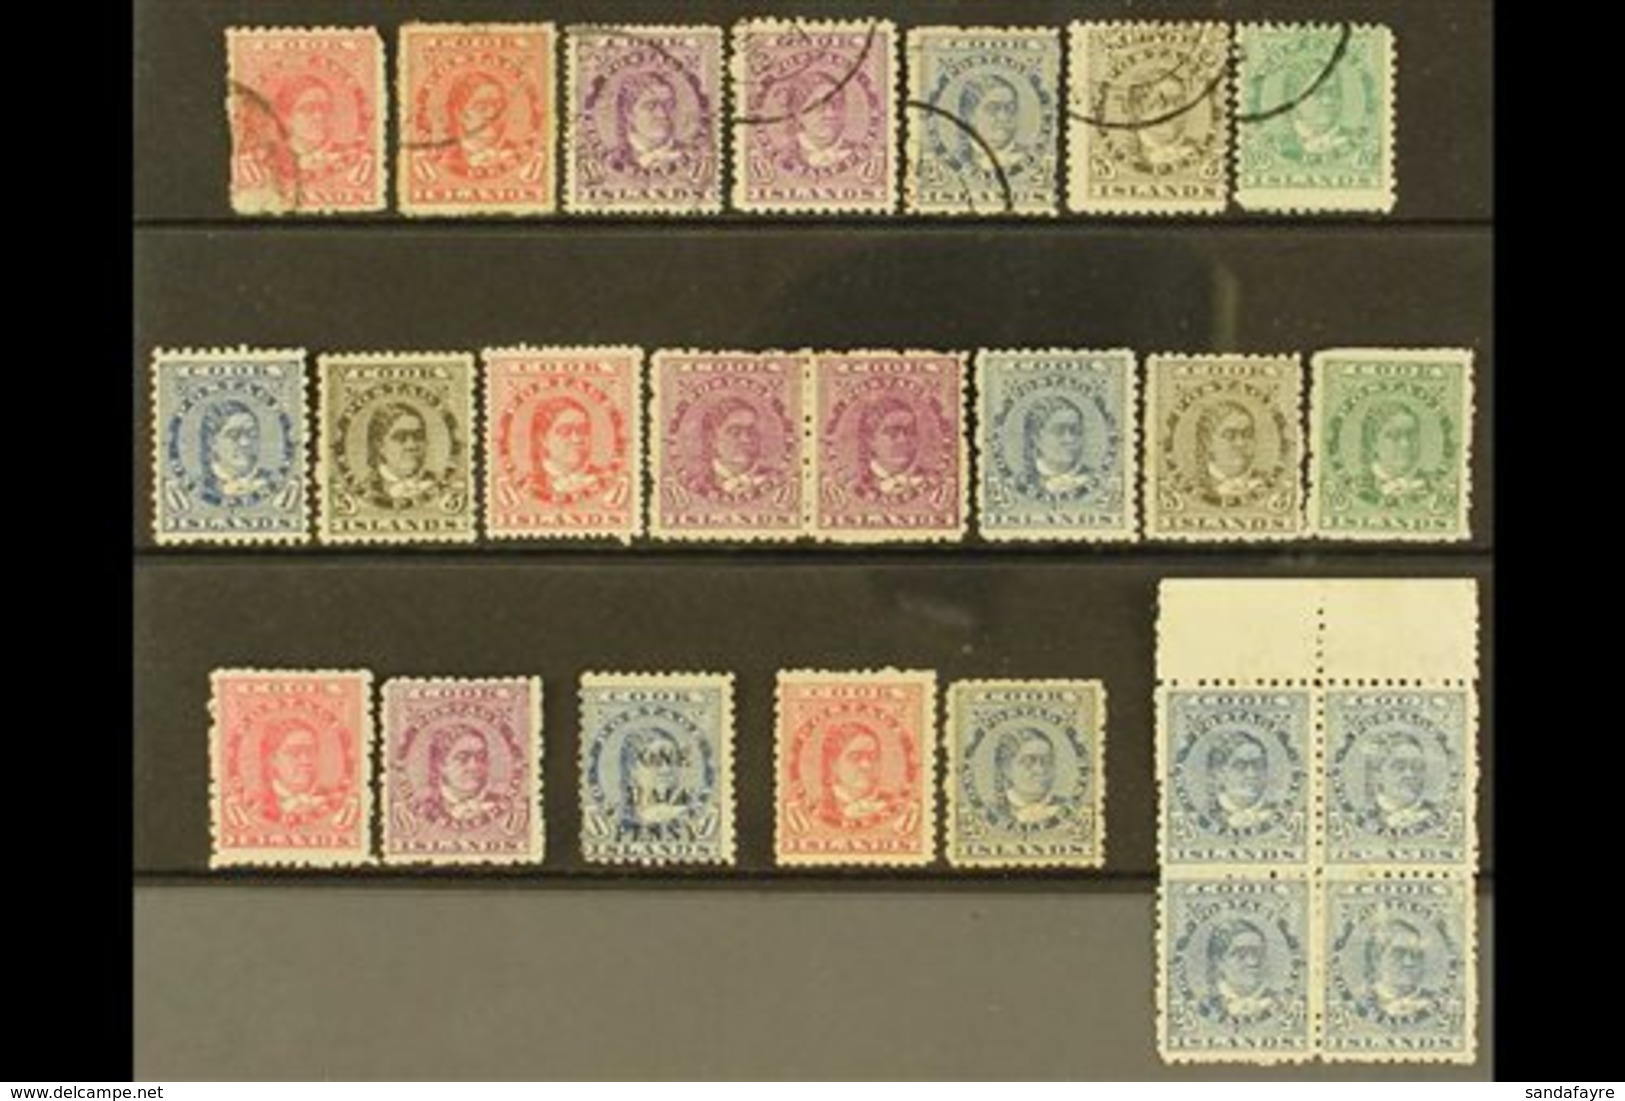 1893 - 1913 QUEEN MAKEA TAKAU ISSUES 1893 Vals To 5d Olive, Perf 11 Vals To 10d Used, 1899 ½d On 1d Blue, 1902 No Wmk On - Cook